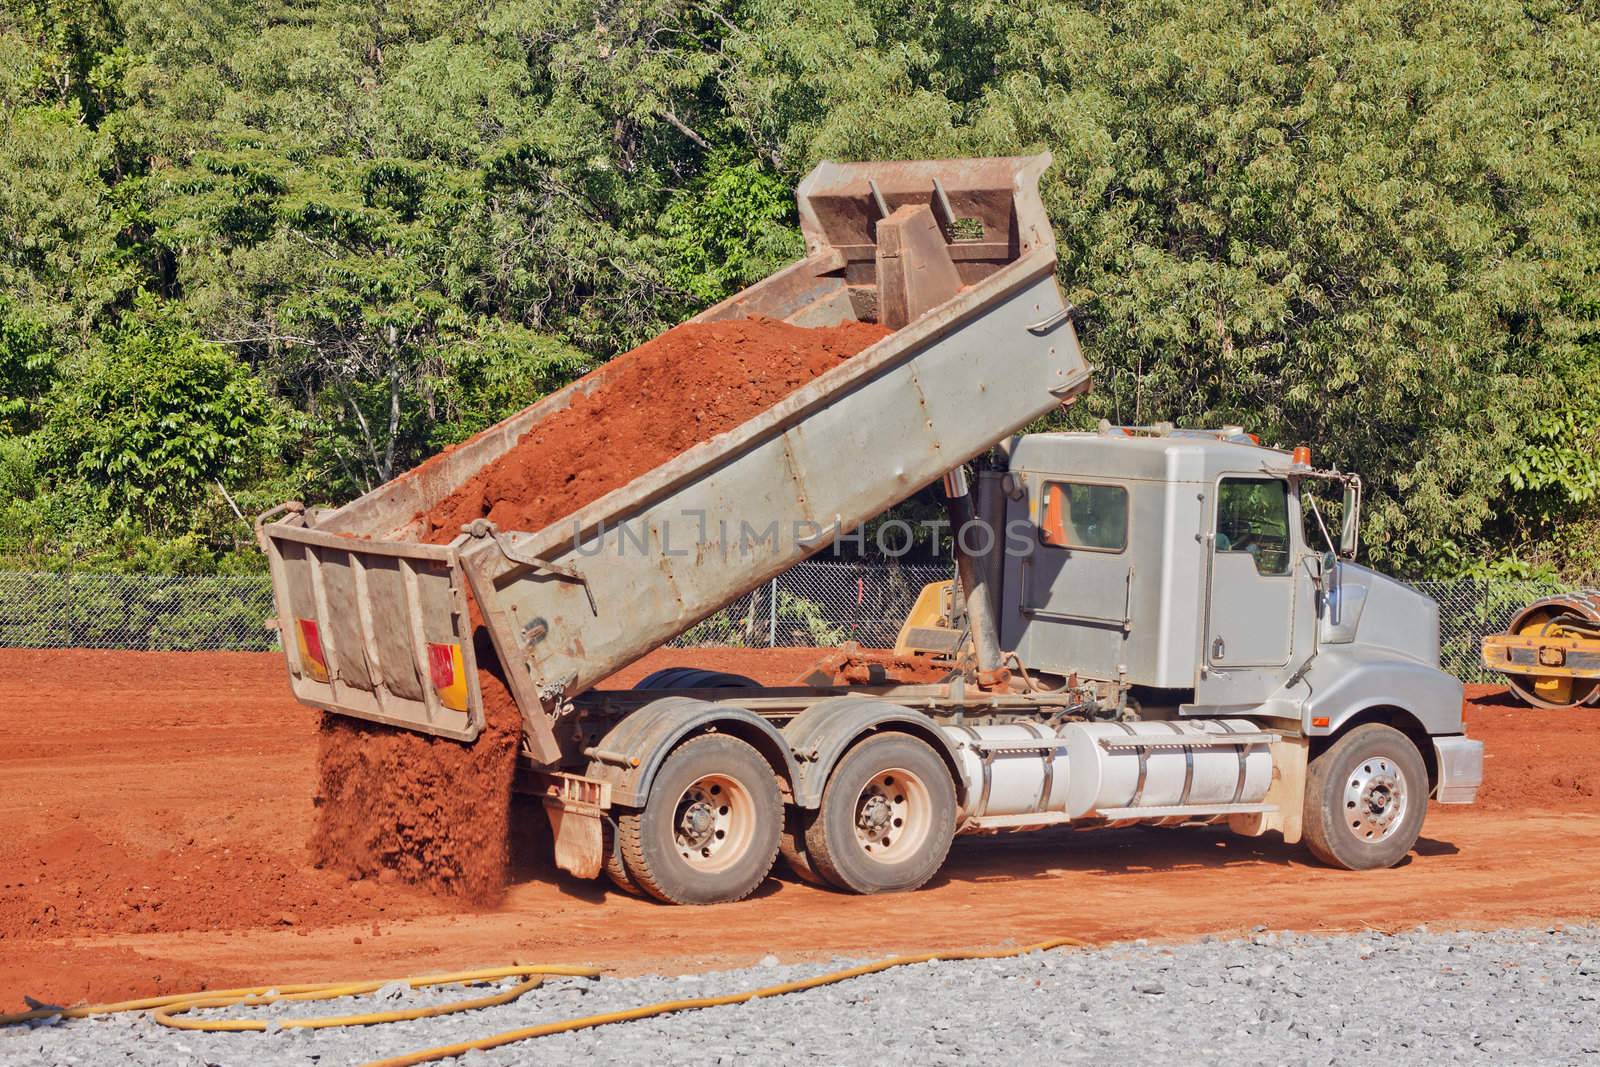 A tip truck is dumping red dirt or soil at a construction site